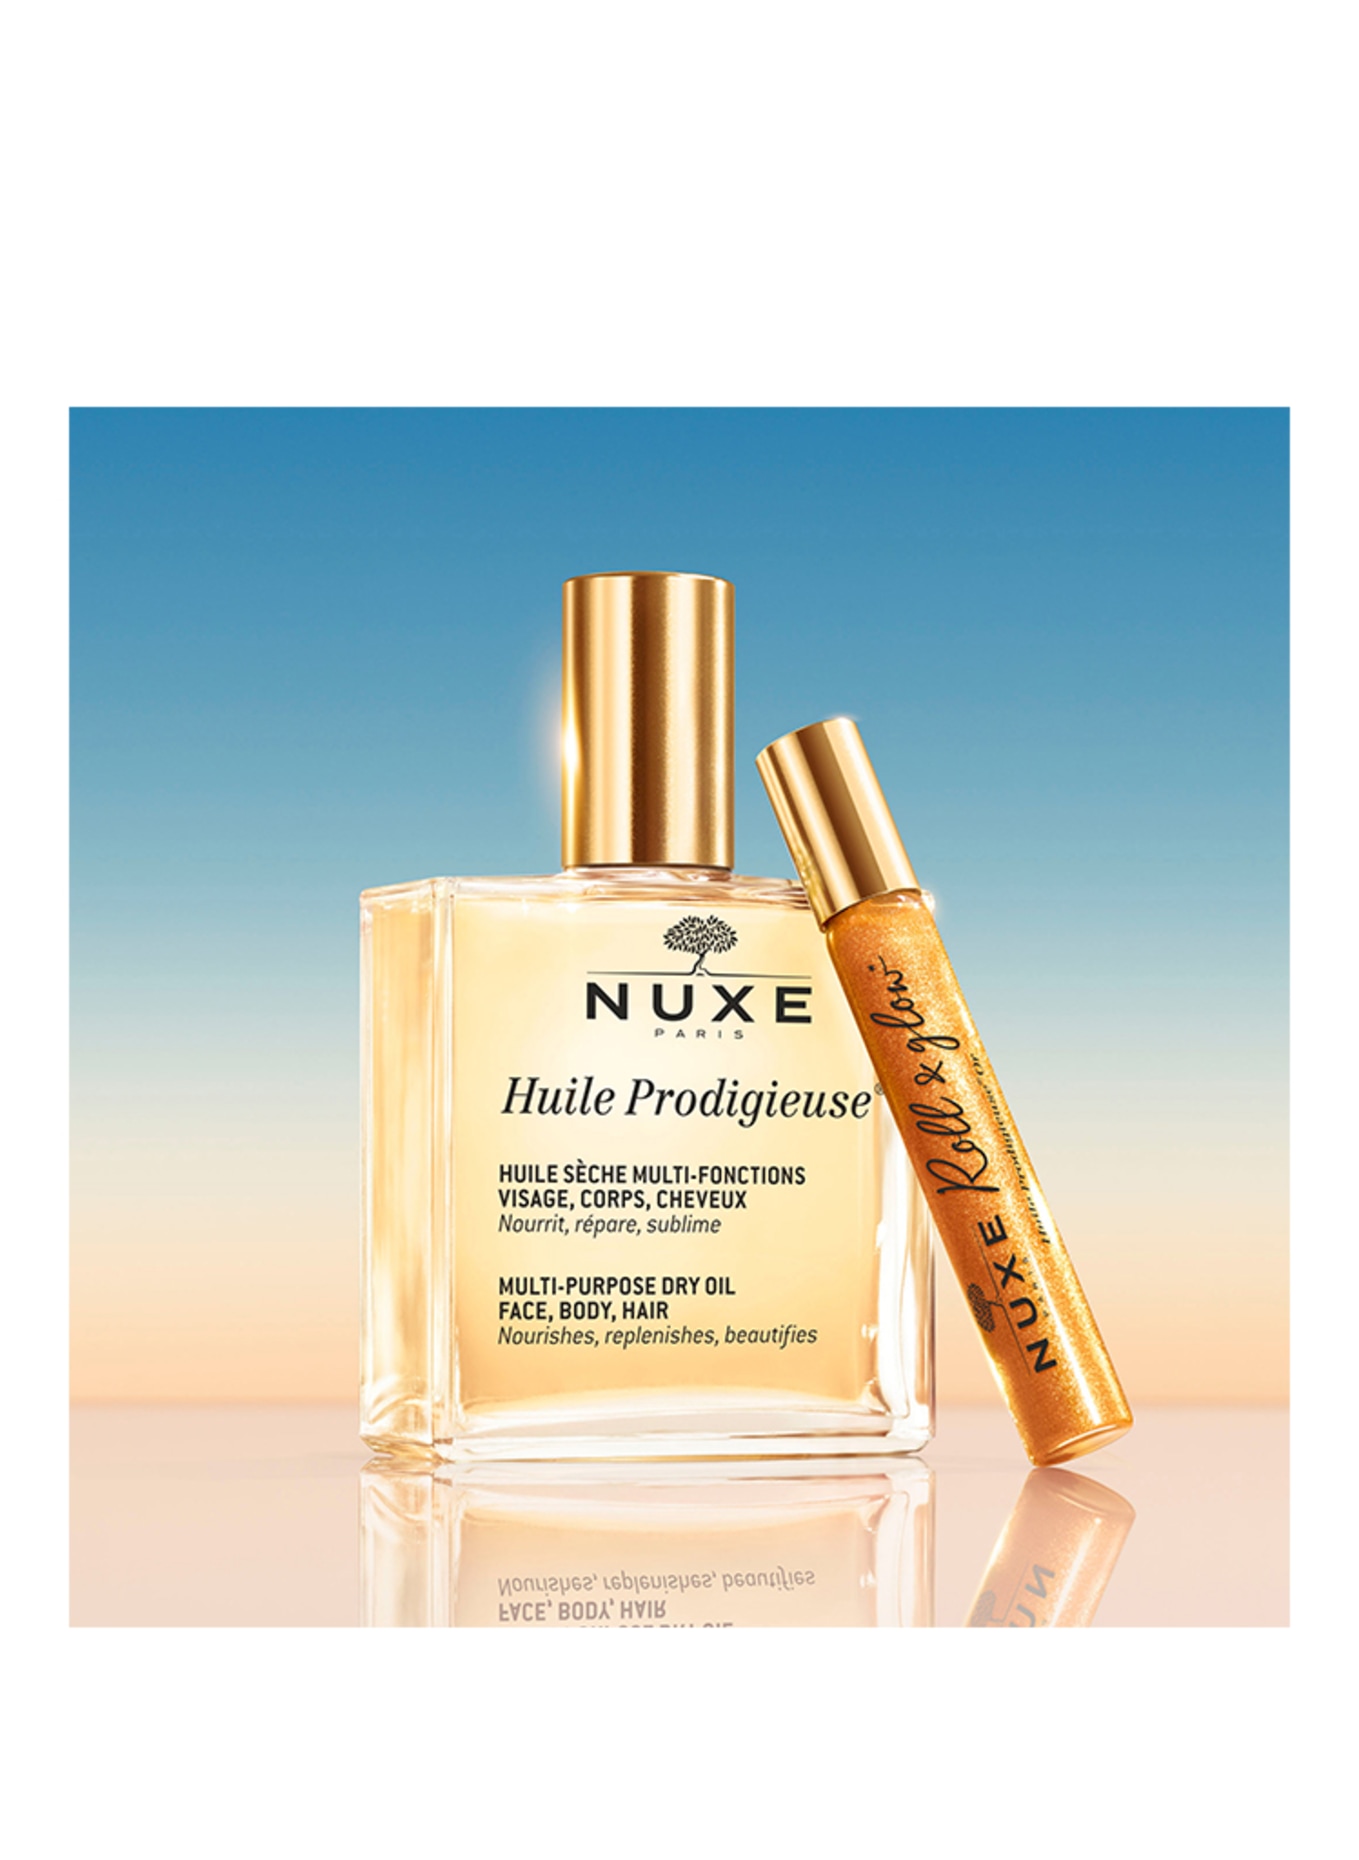 NUXE HUILE PRODIGIEUSE CLASSIC + ROLL ON OR